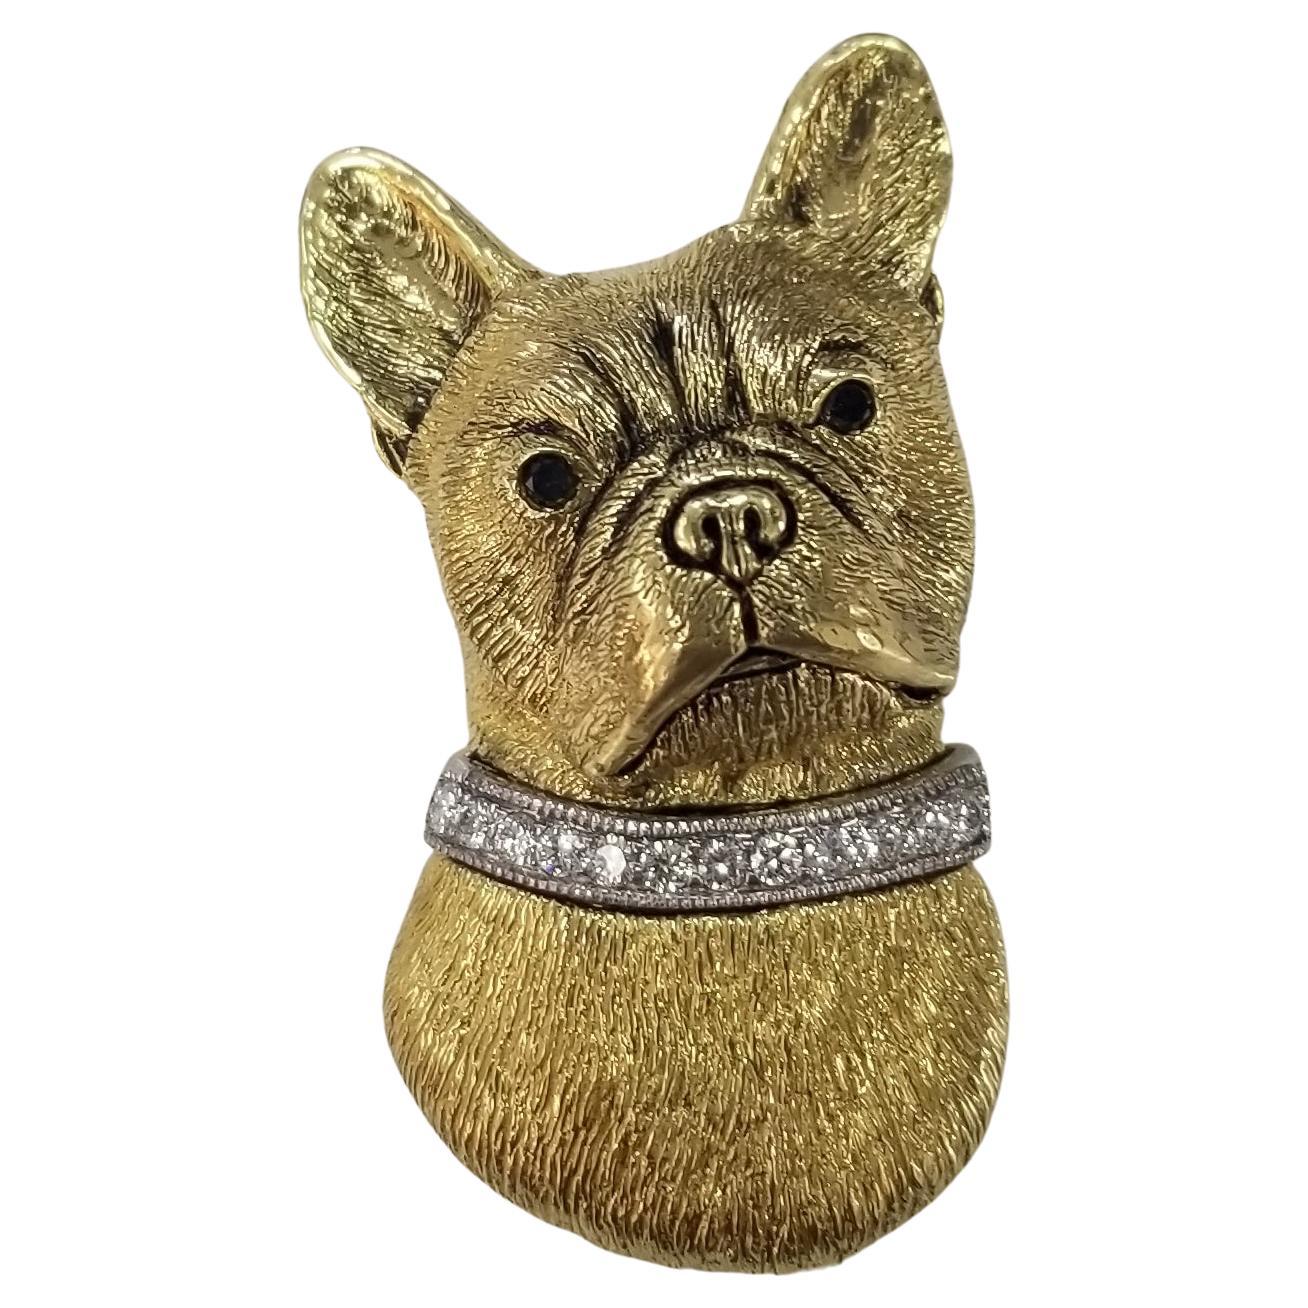 Madleine Kay 18k Yellow Gold "French Bull Dog" Head Paved in Diamonds with Black